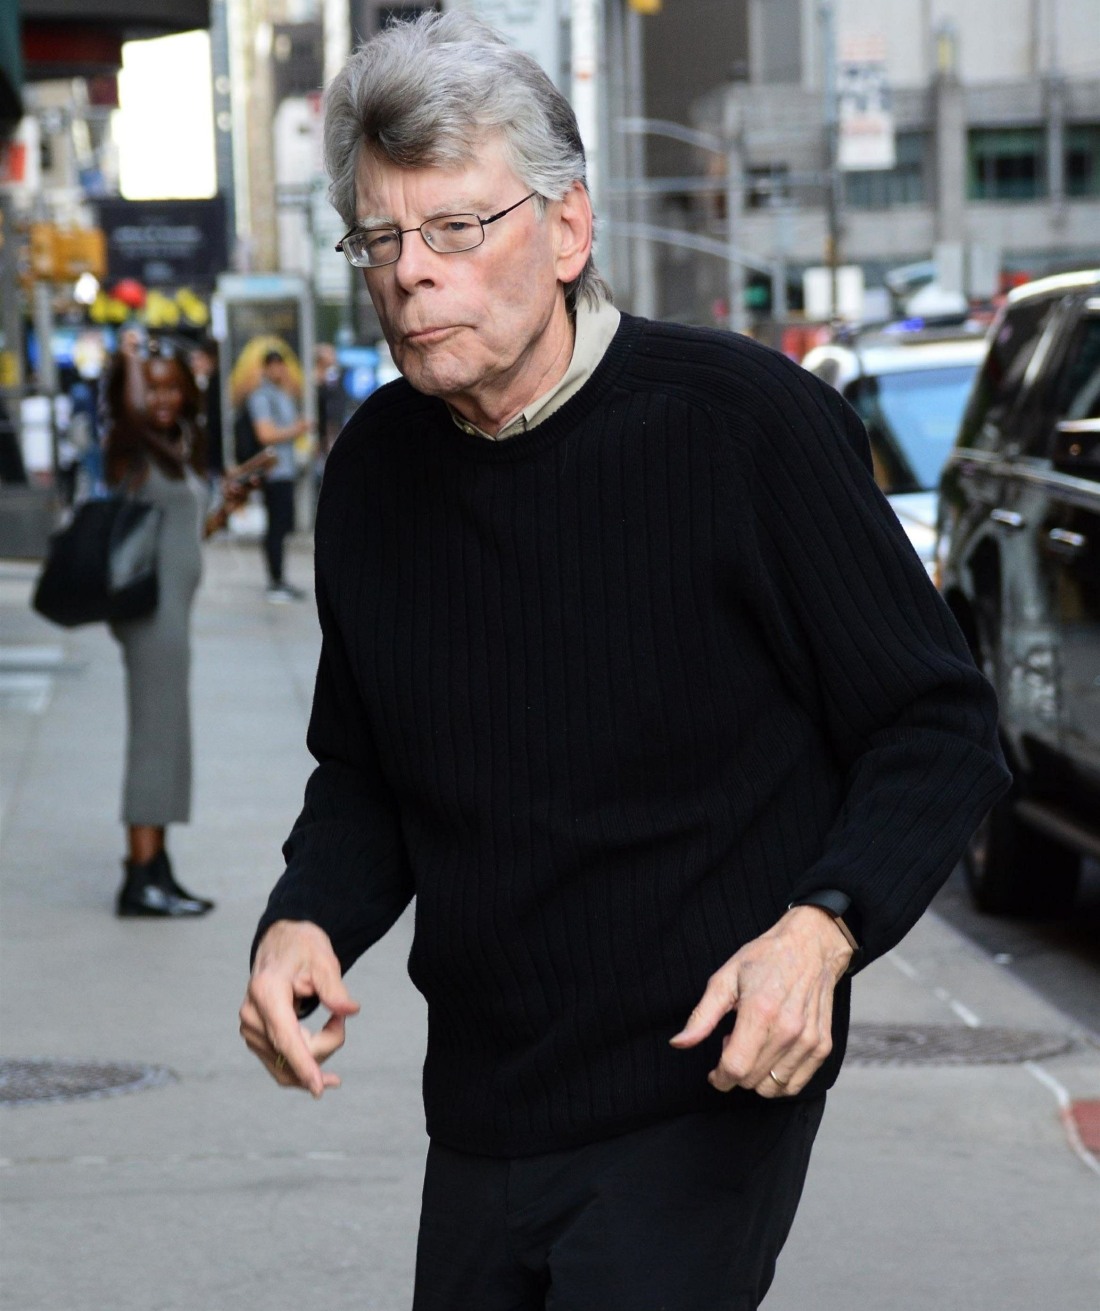 Stephen King rushes into his appearance on 'The Late Show With Stephen Colbert'